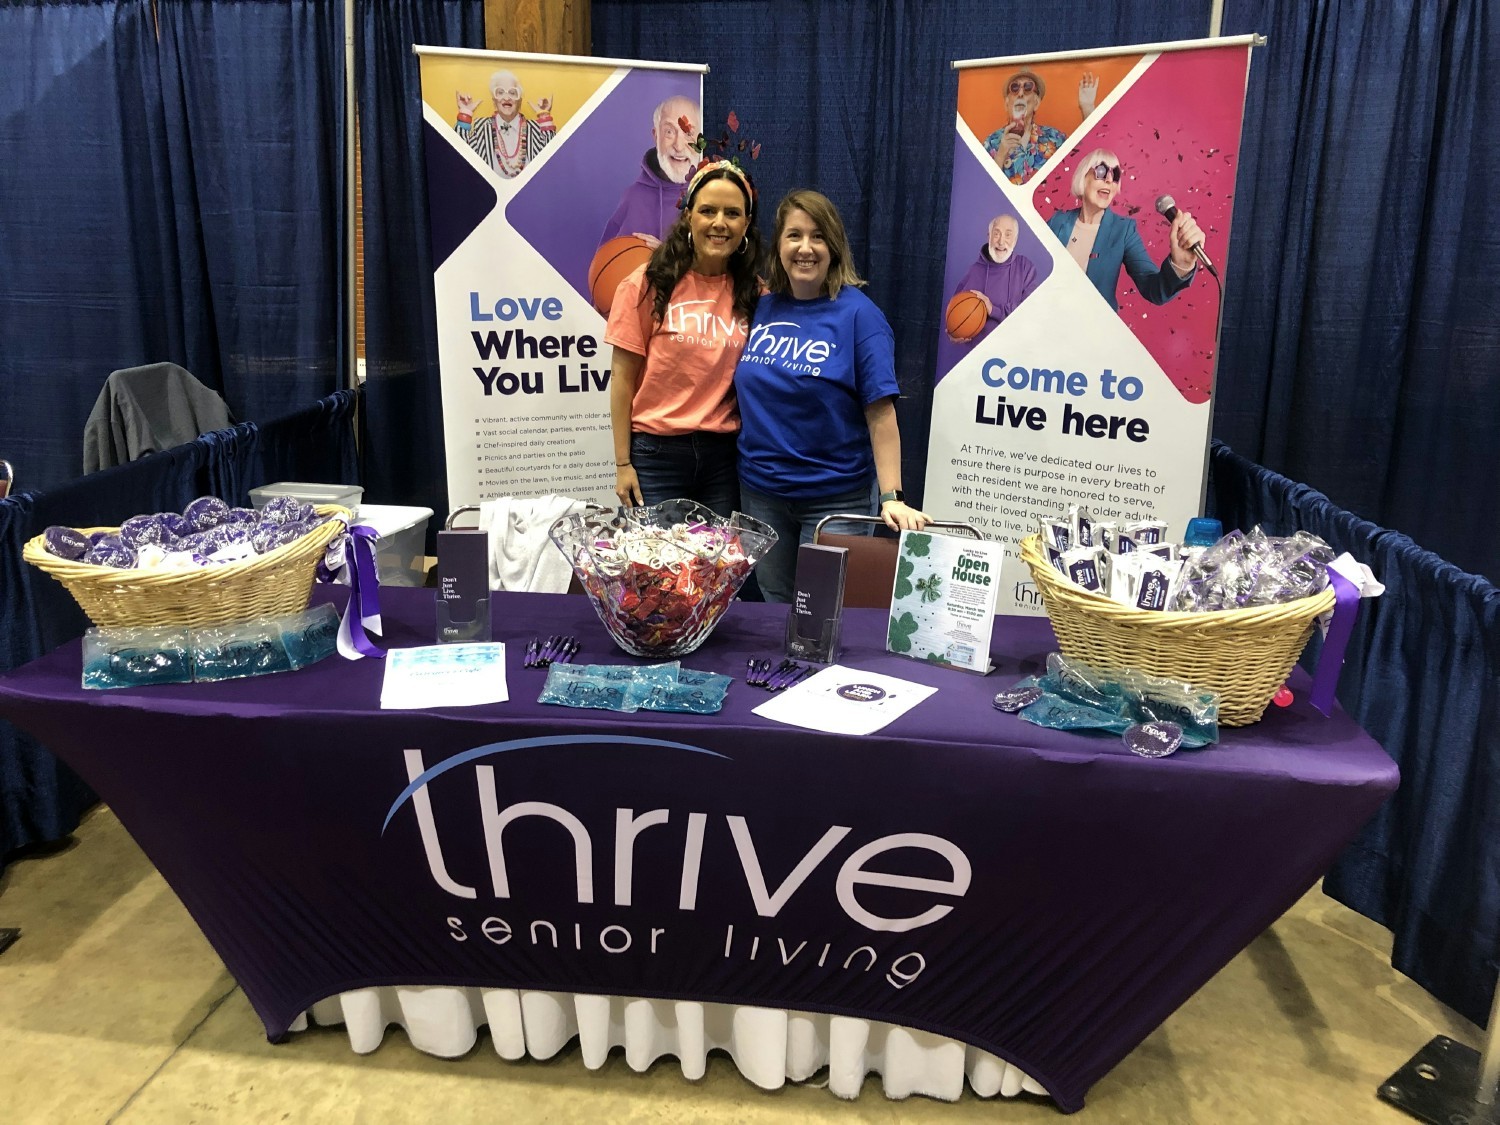 Thrive at Green Island - Event time!